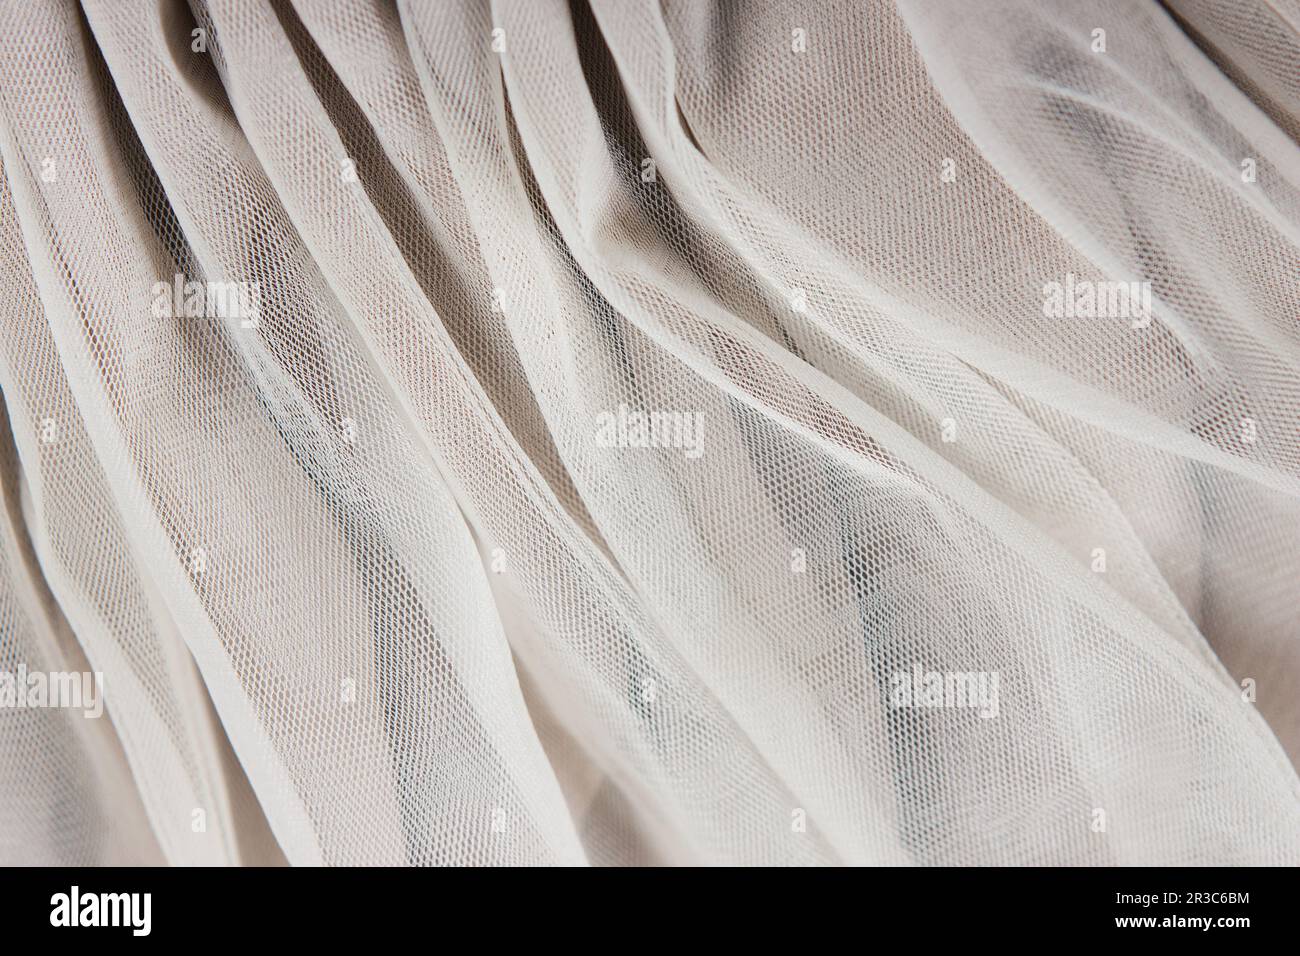 Chiffon tulle fabric textured background. pleated skirt fabric texture ...